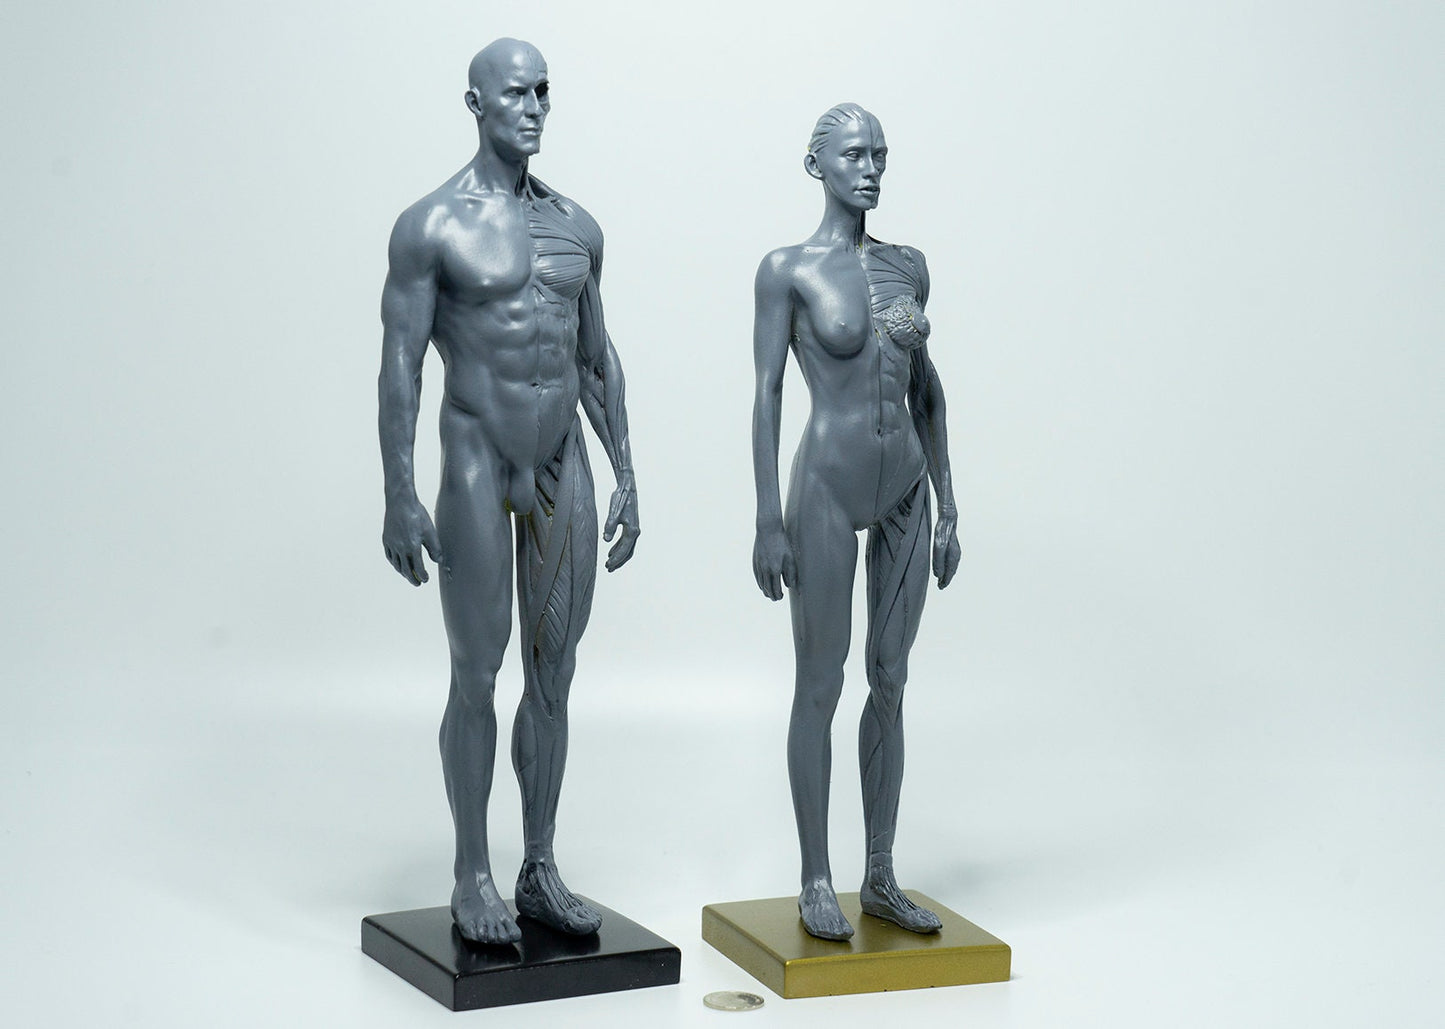 Image of Artist Anatomy Tool - Male & Female Sculpture Statue | Human Body Figure Model for Anatomy Drawing & Visual Art | Art Supplies, Home Decor, Art Student Tools, Muscle Anatomy, Artist Bust